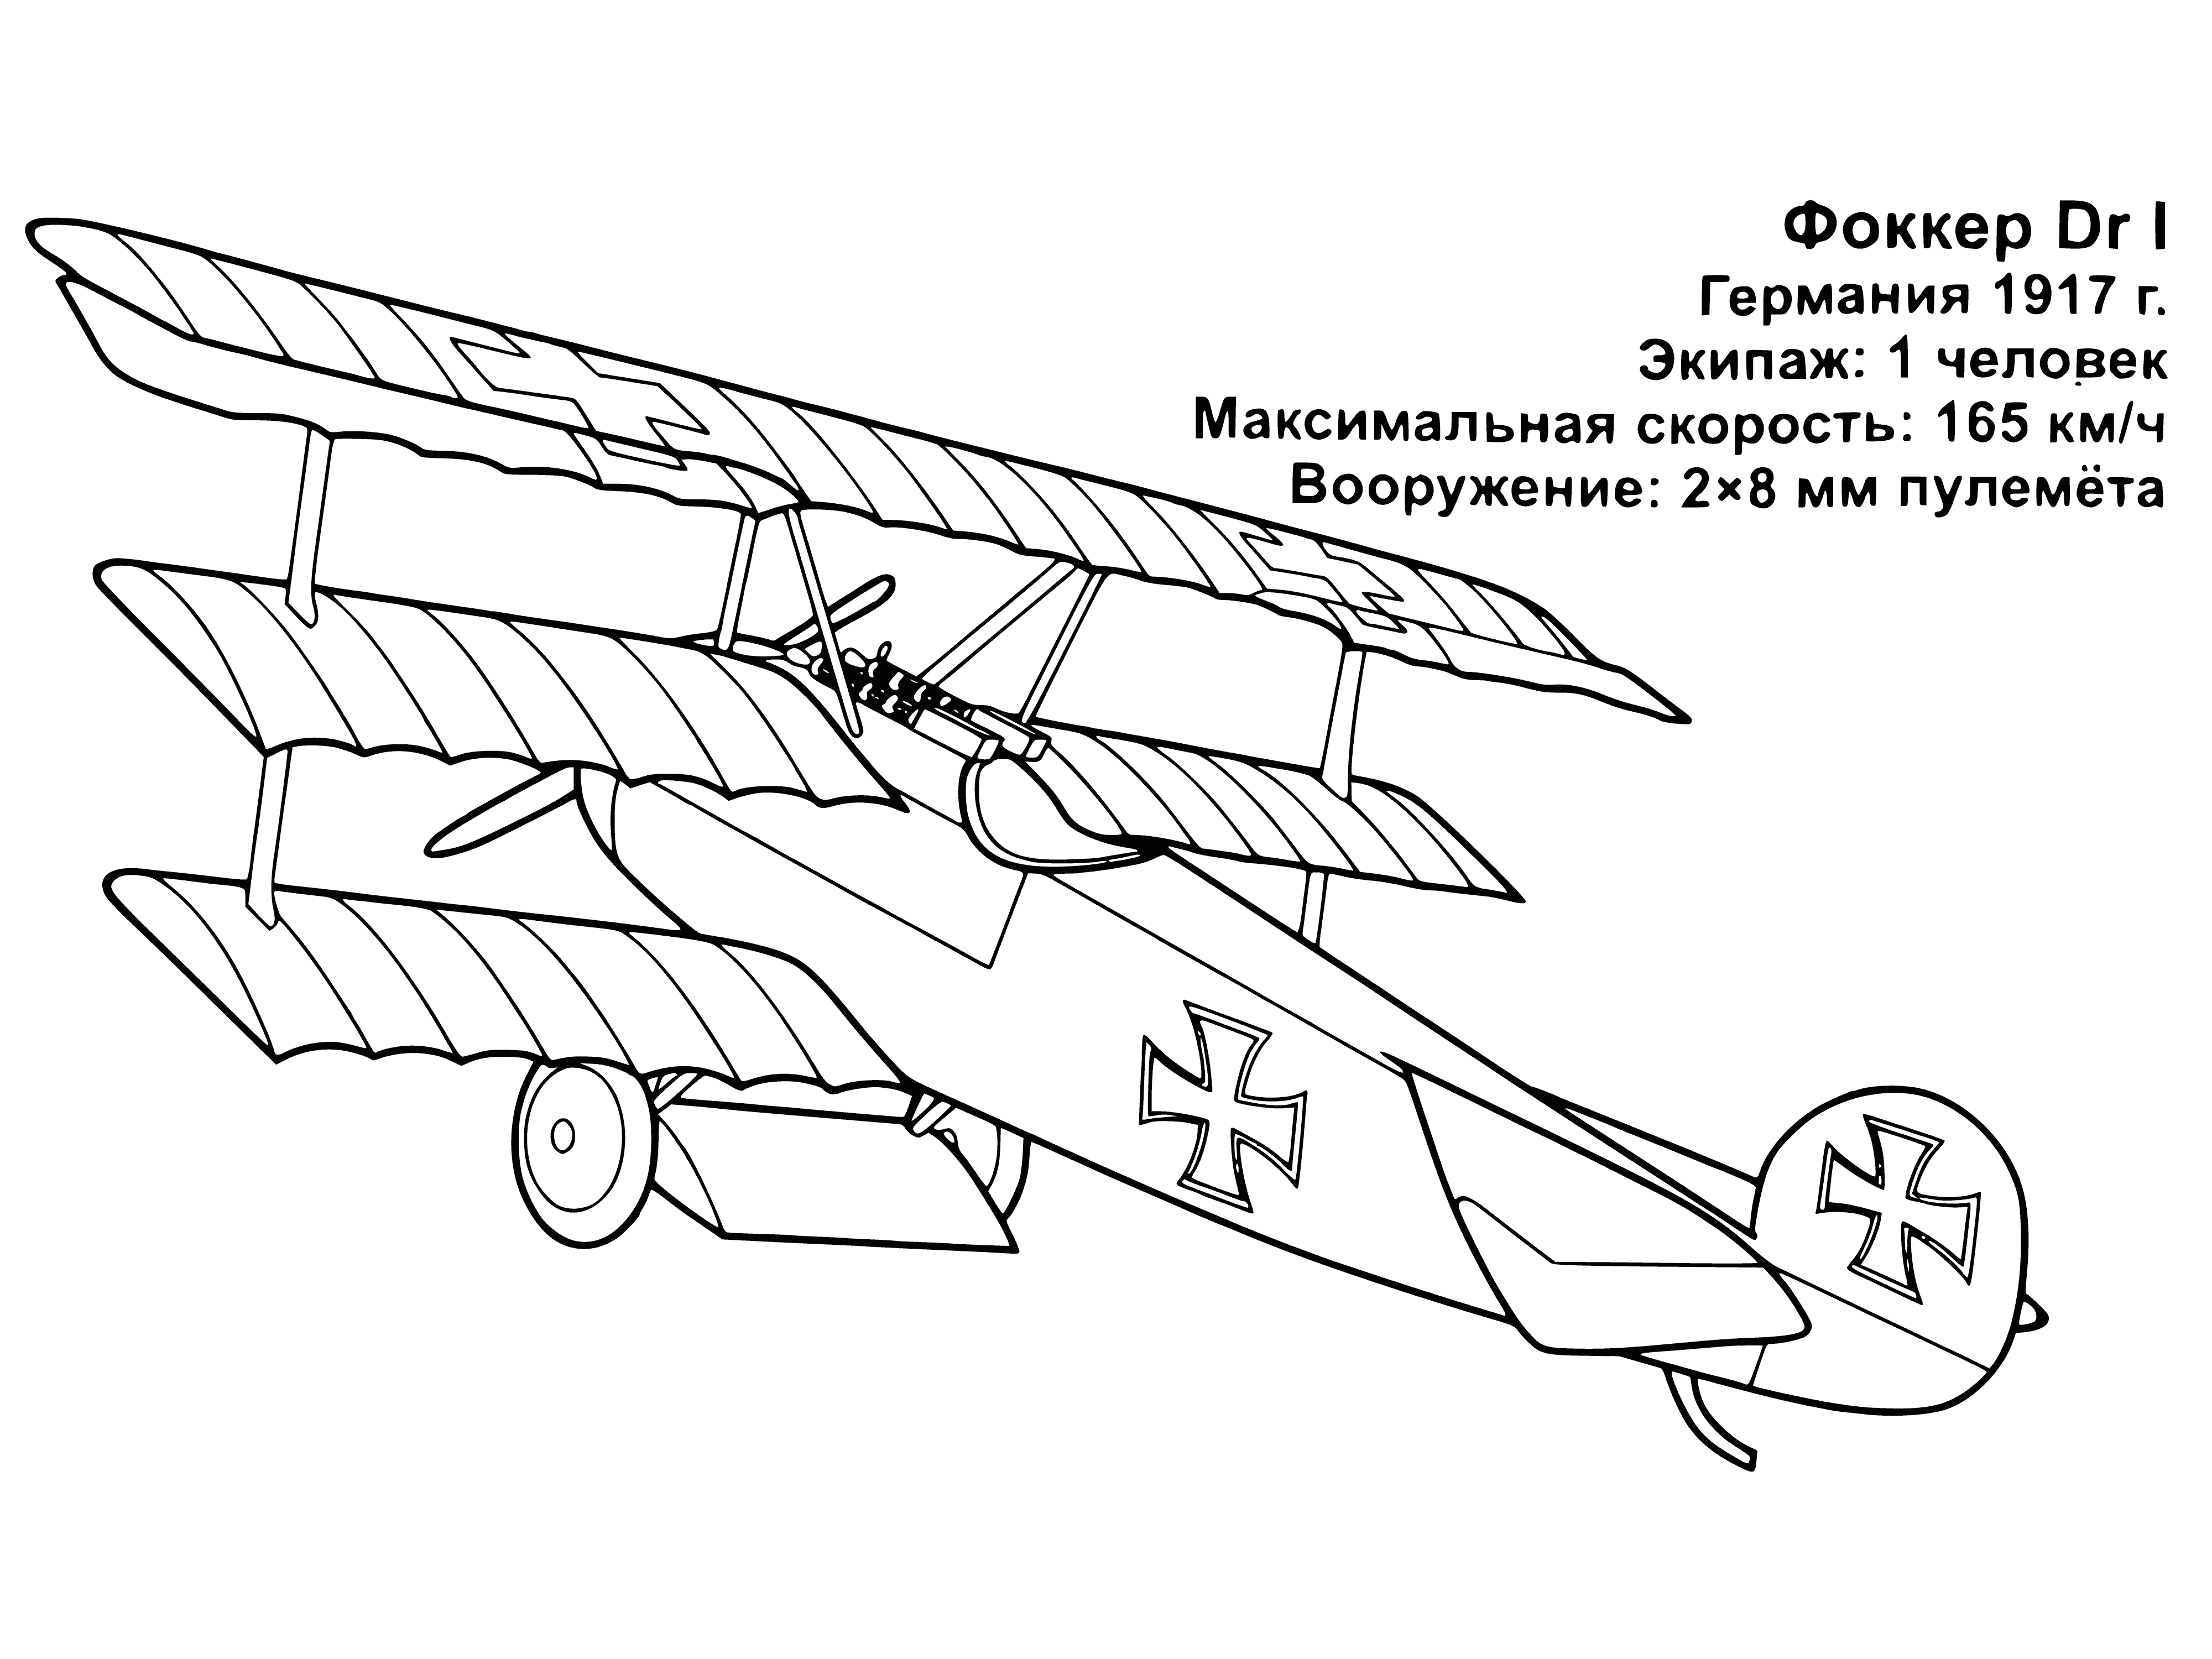 coloring page: Colorful German planes from 1917 depicted in a variety of shapes & colors, from in-flight to grounded.